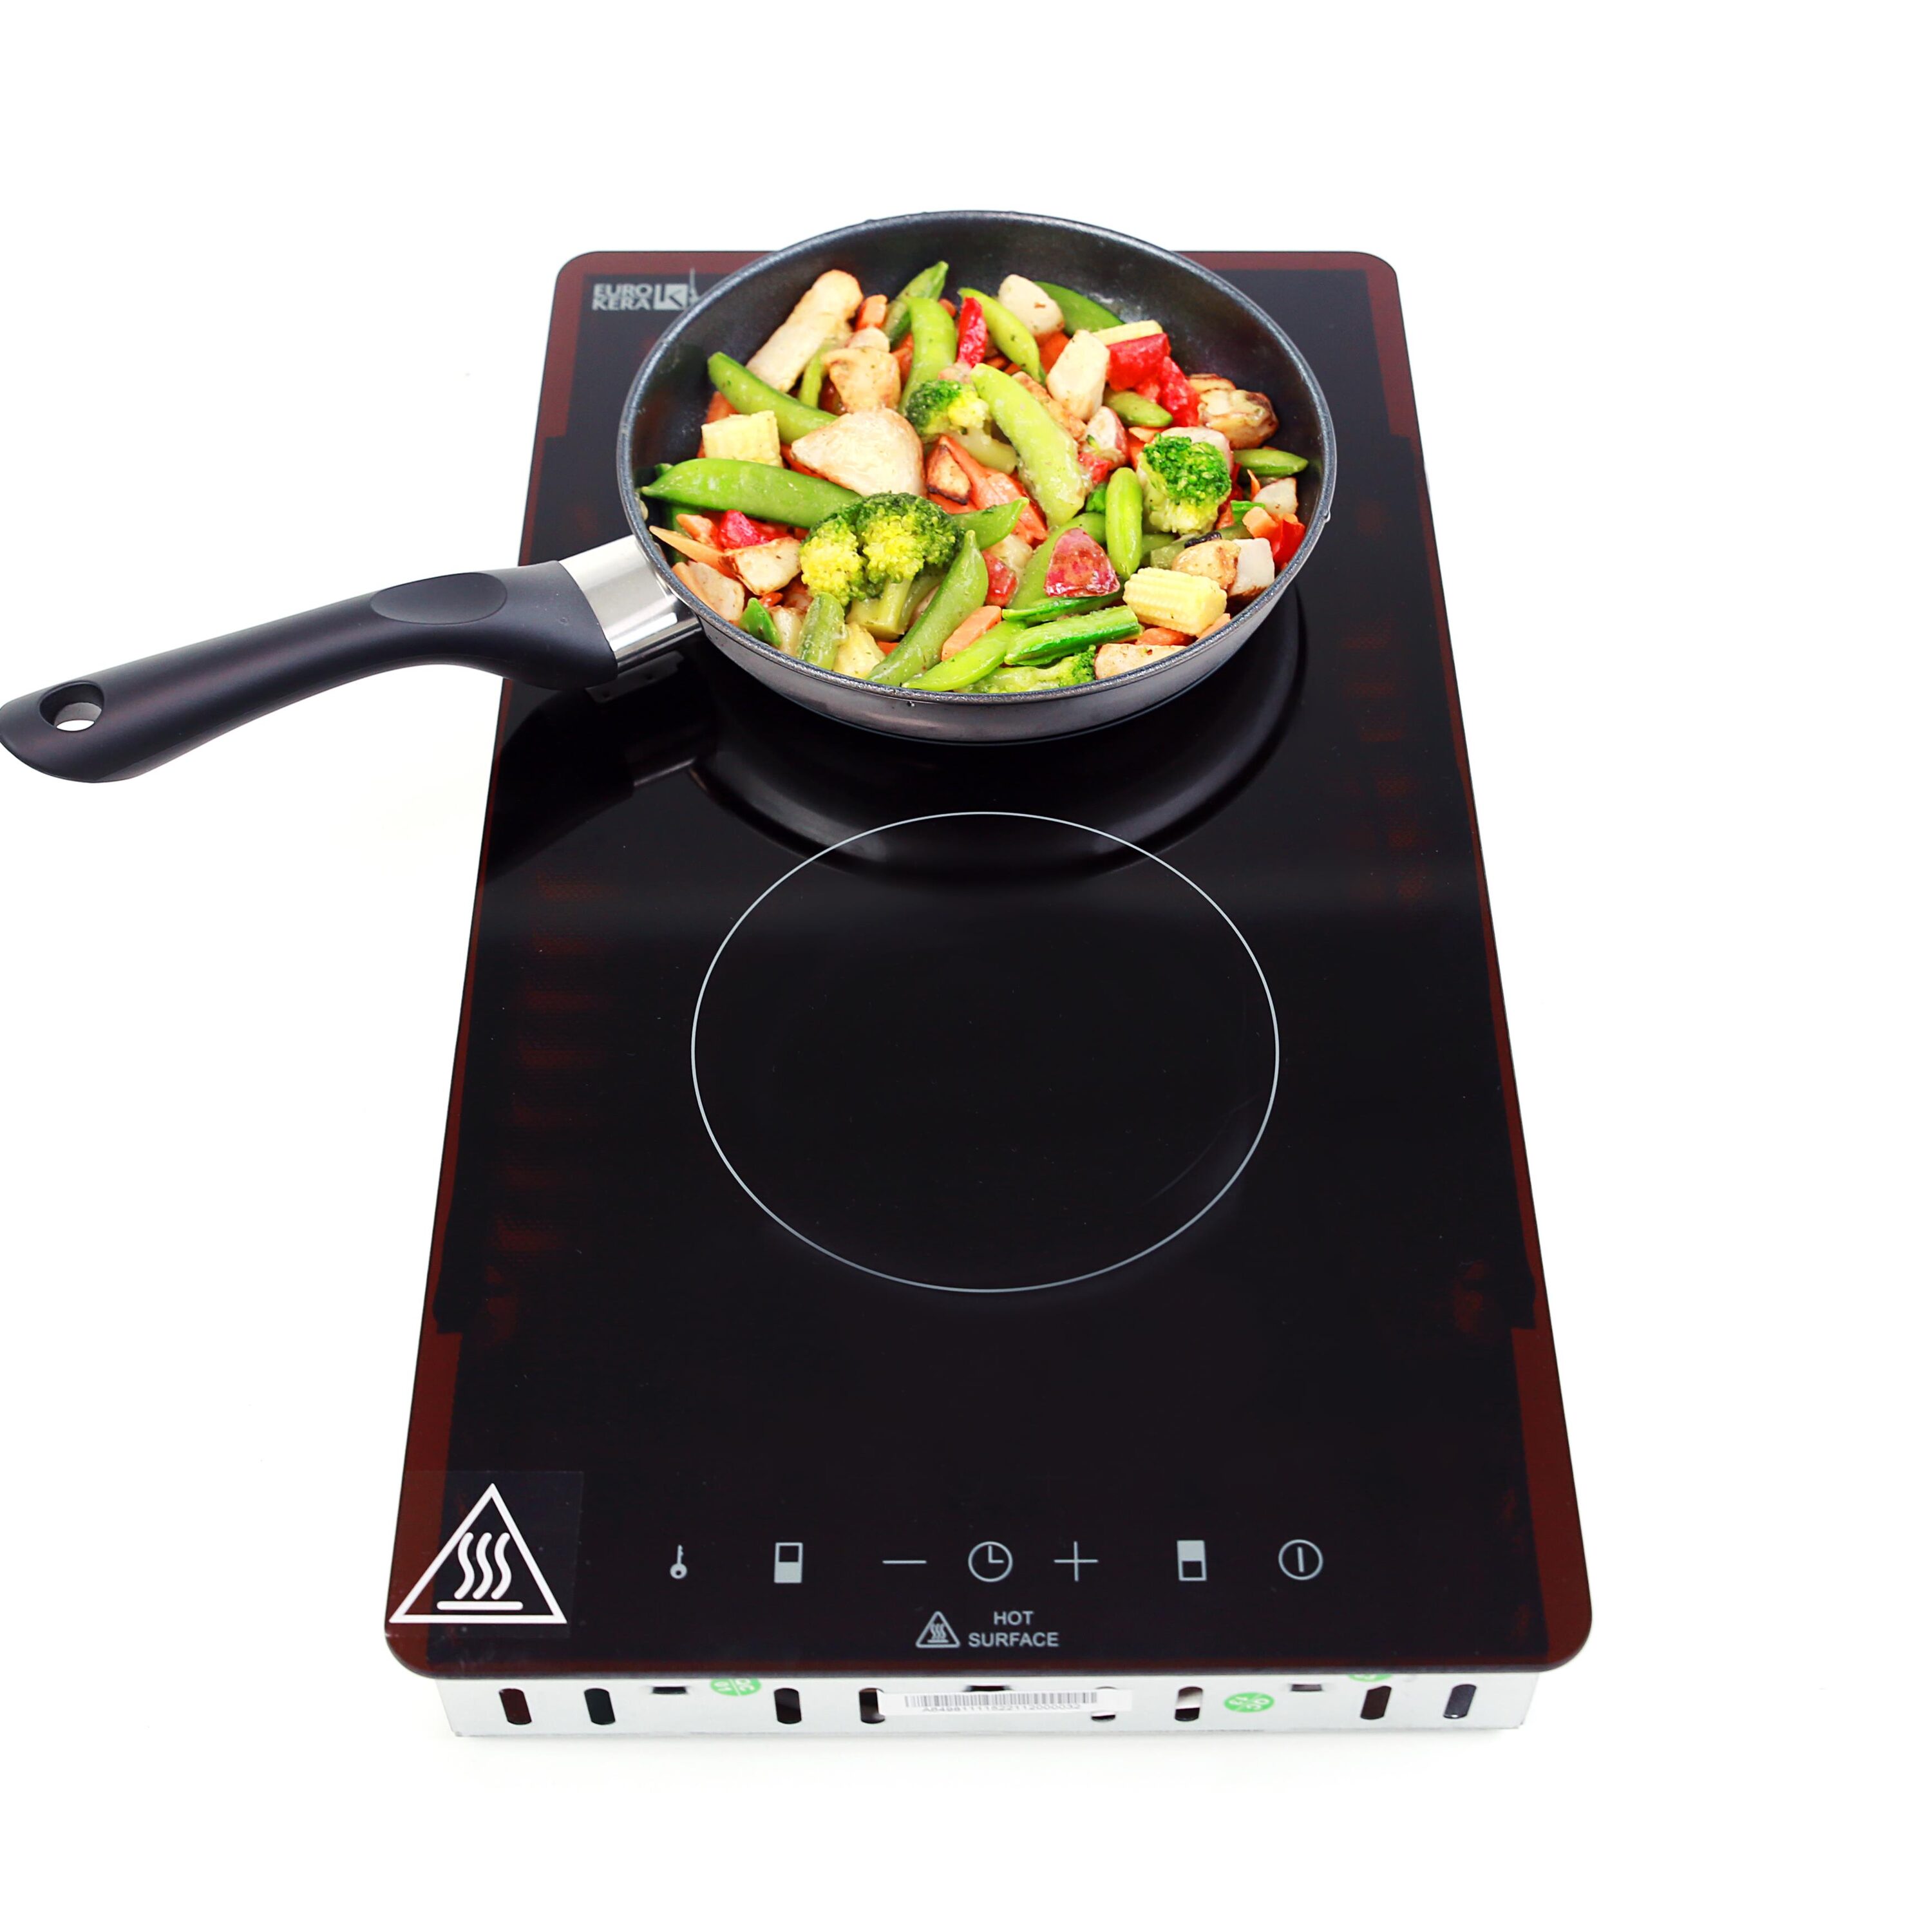 Summit Appliance 12-in 2 Burners Smooth Surface (Radiant) Black